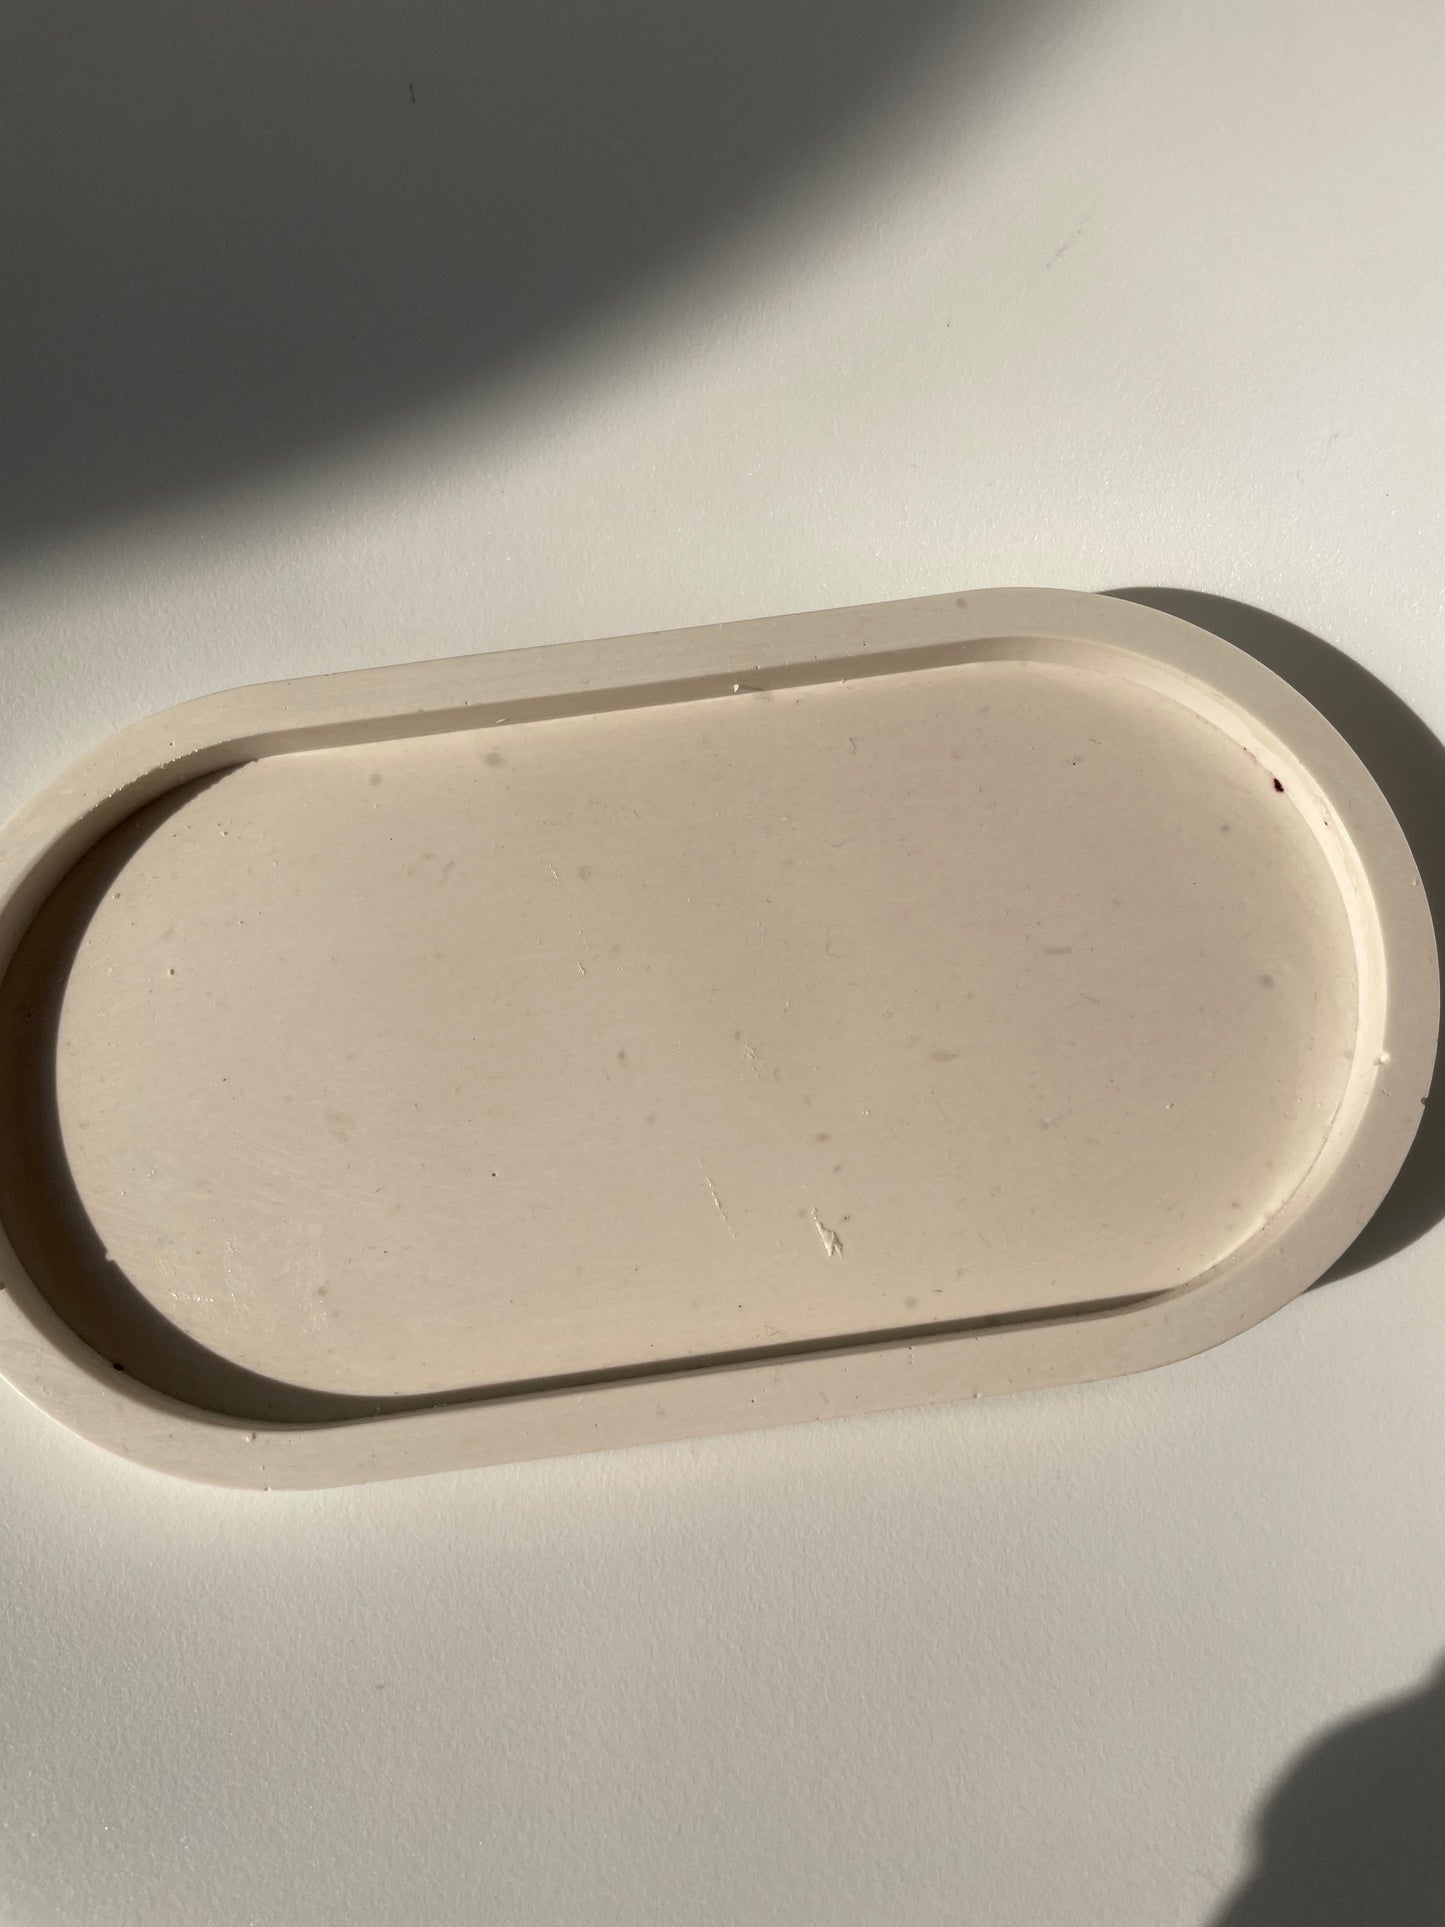 image of an oval tray with slight imiperfections